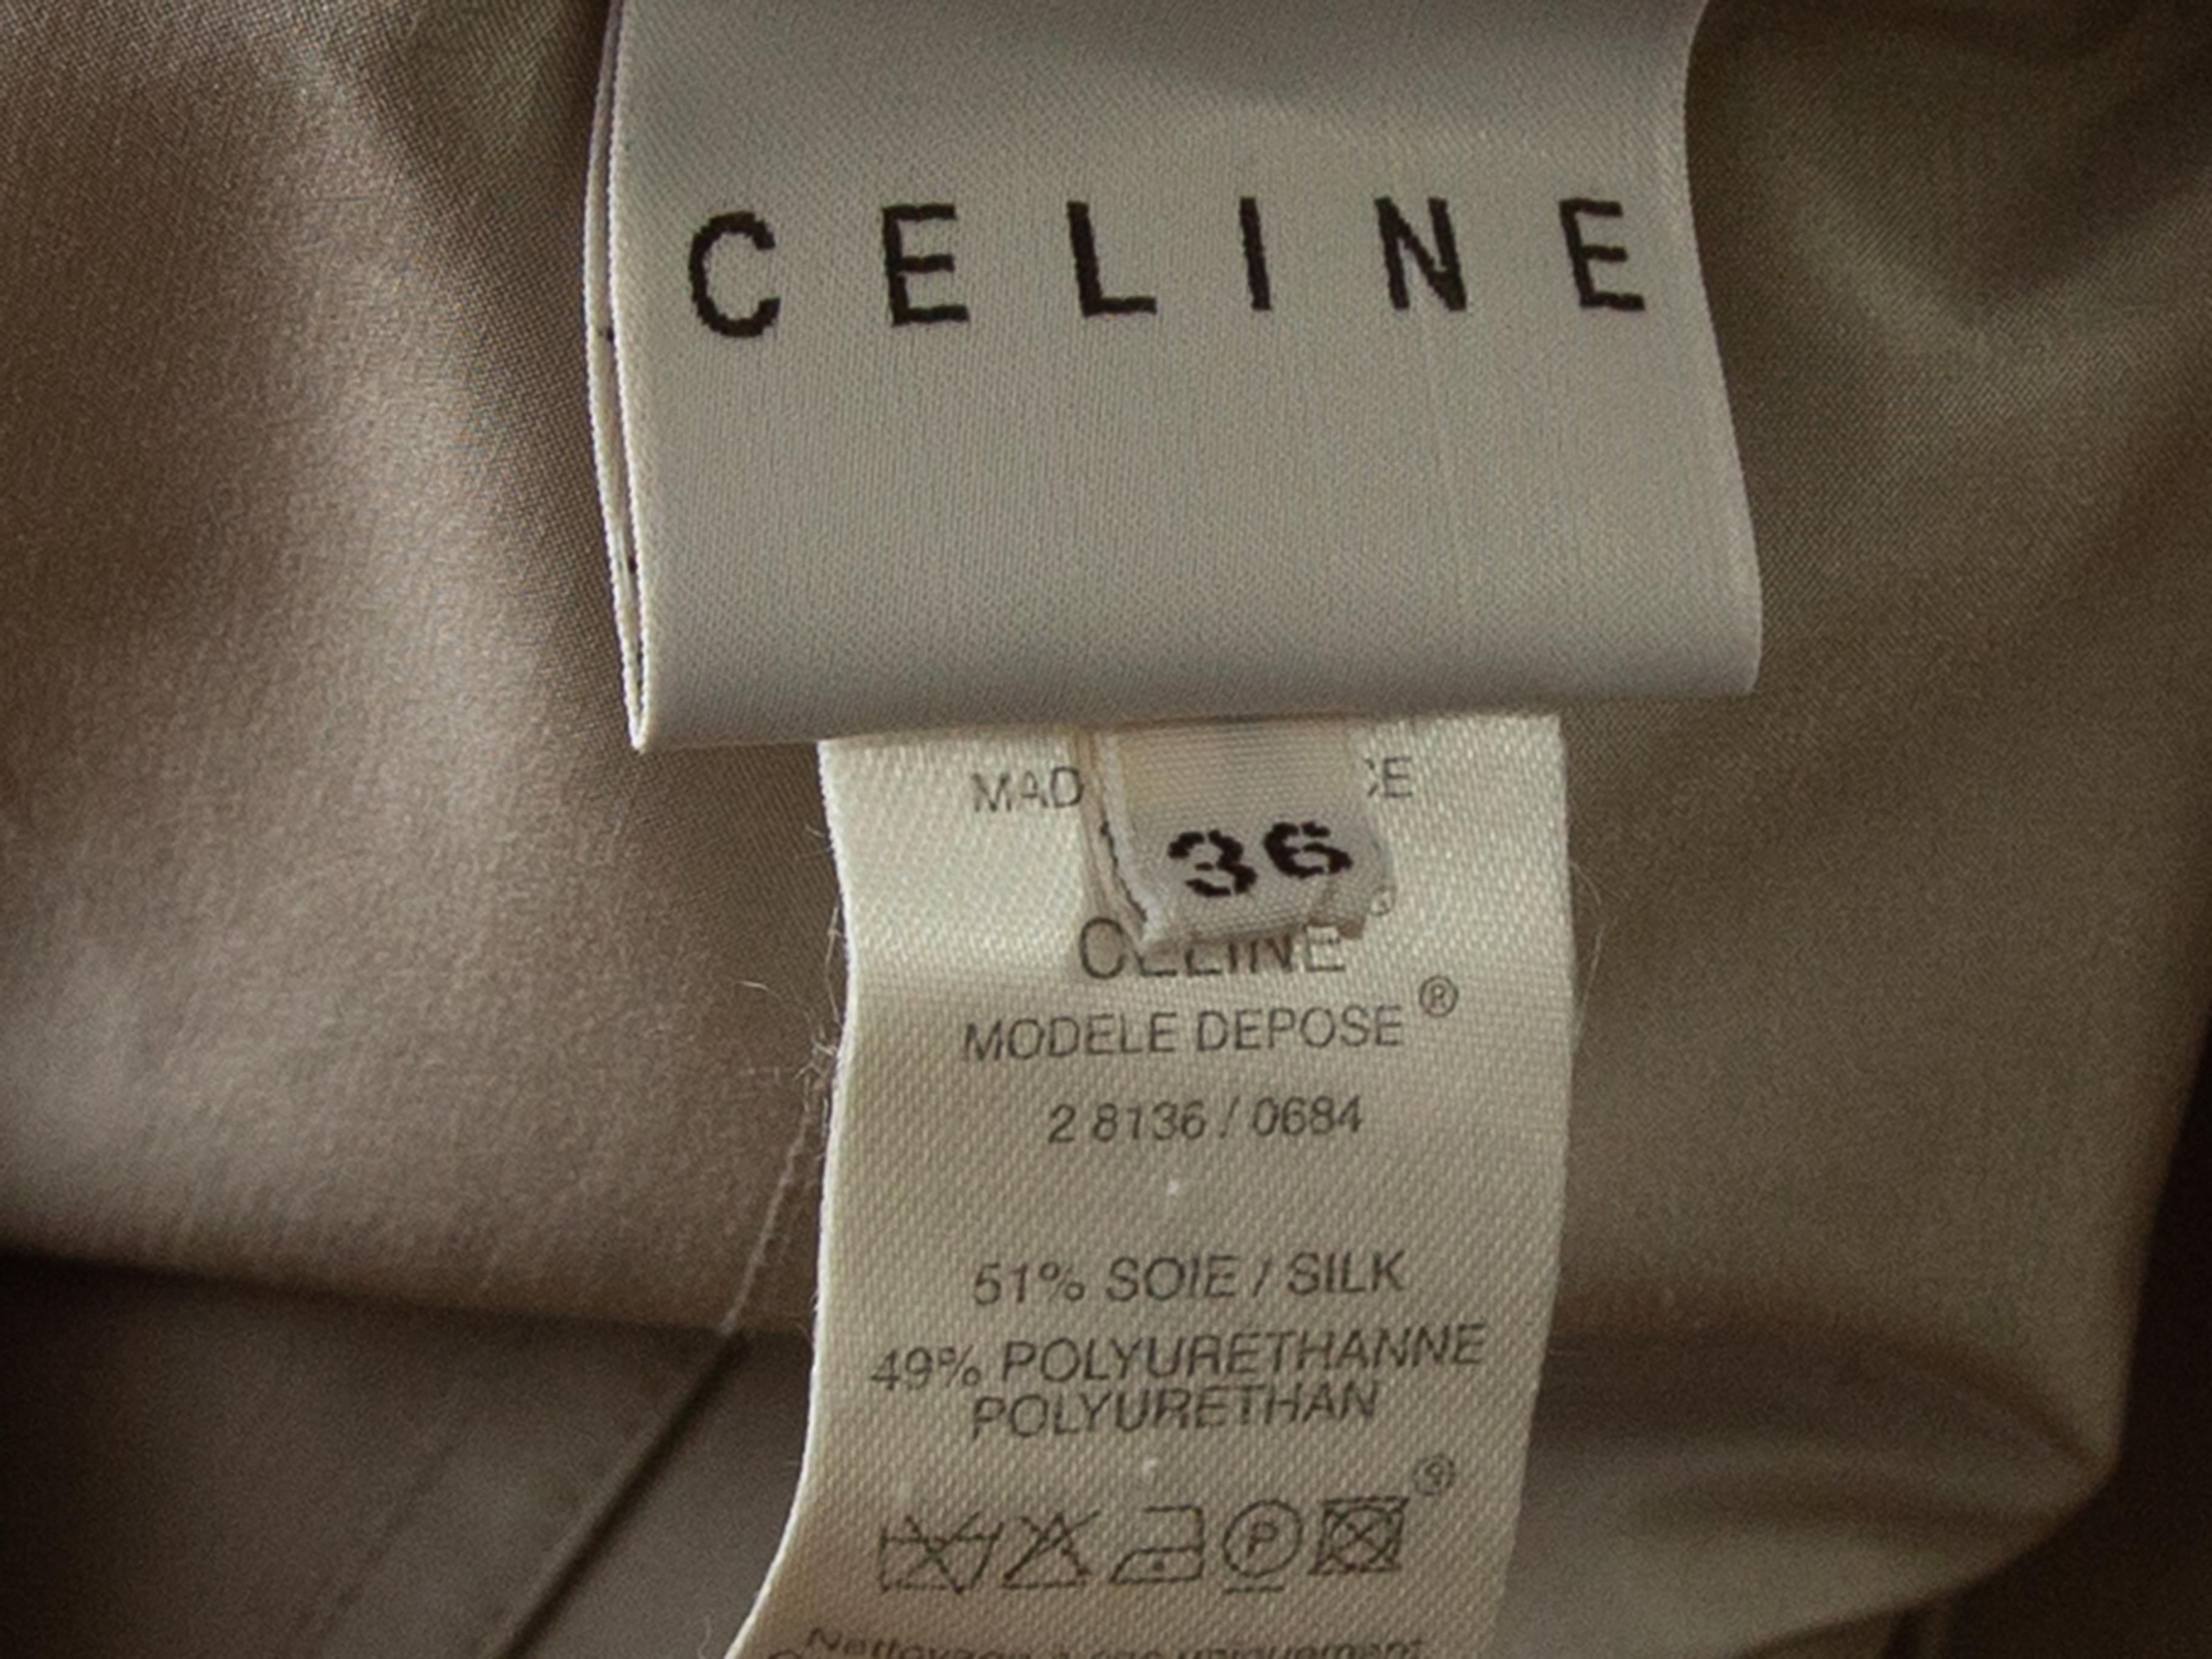 Product details: Beige long trench coat by Celine. Gold-tone zipper detailing throughout. Dual hip pockets. Button and belt closures. Designer size 36. 38